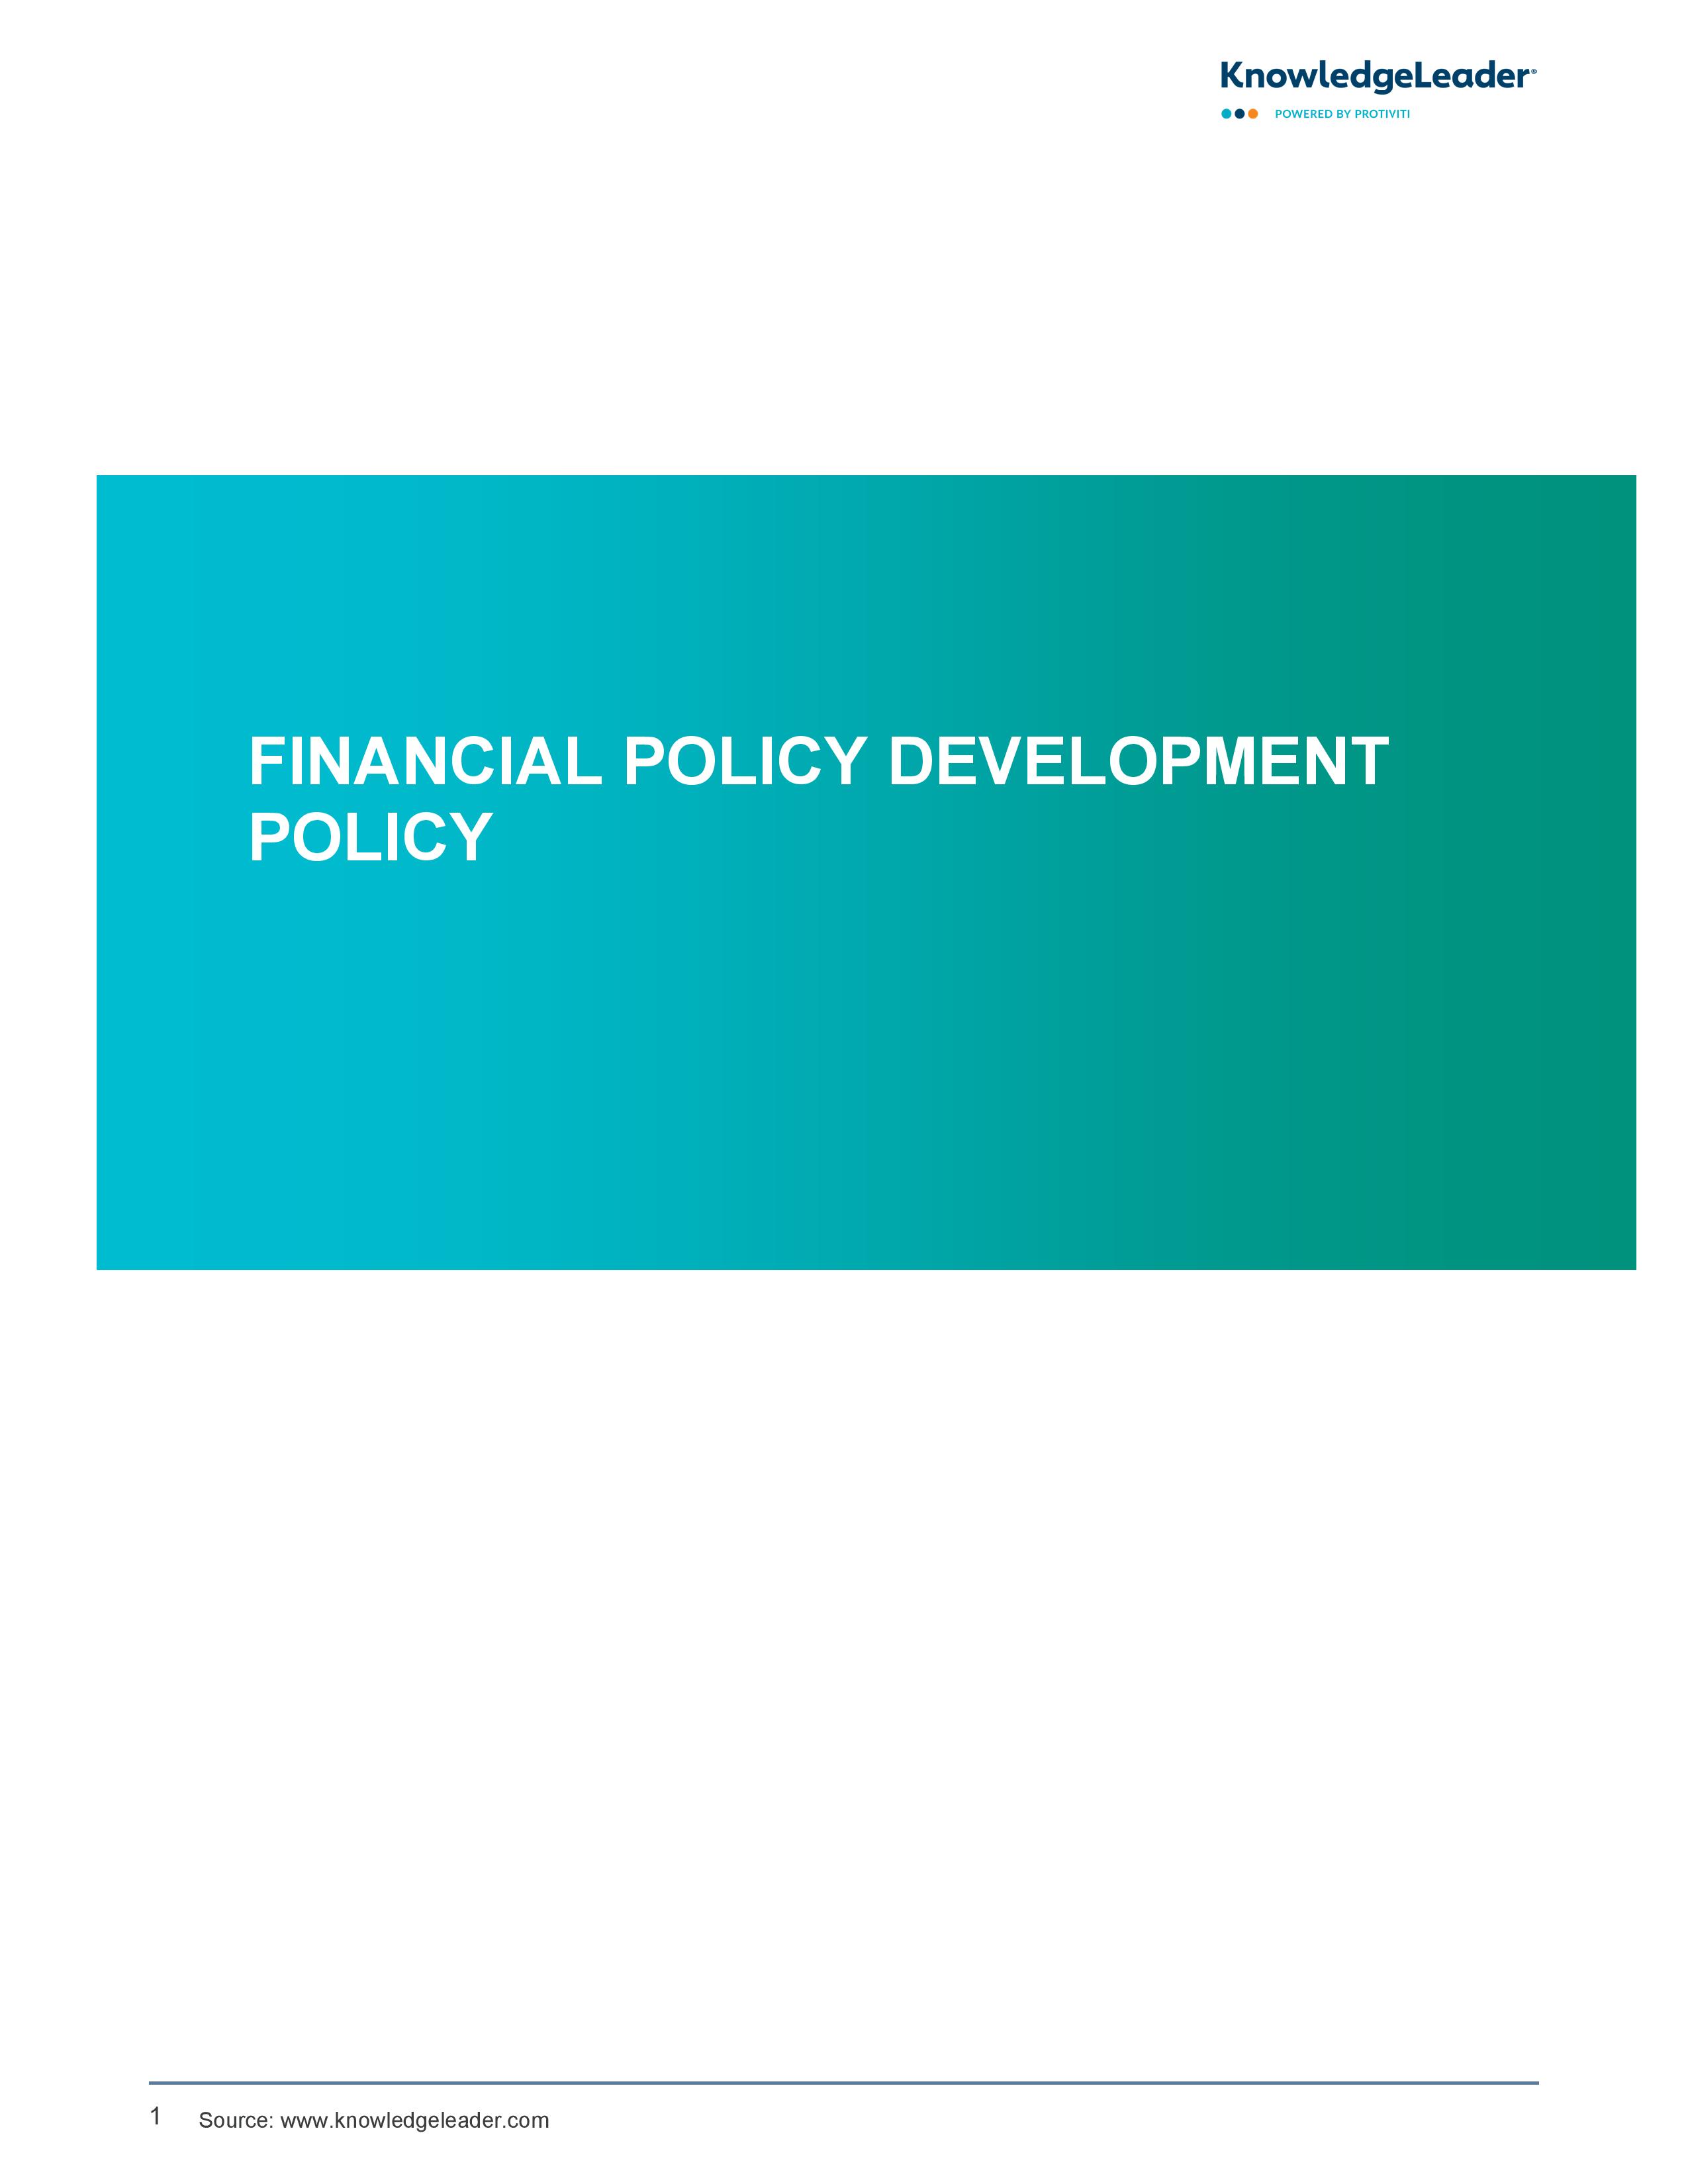 screenshot of the first page of Financial Policy Development Policy